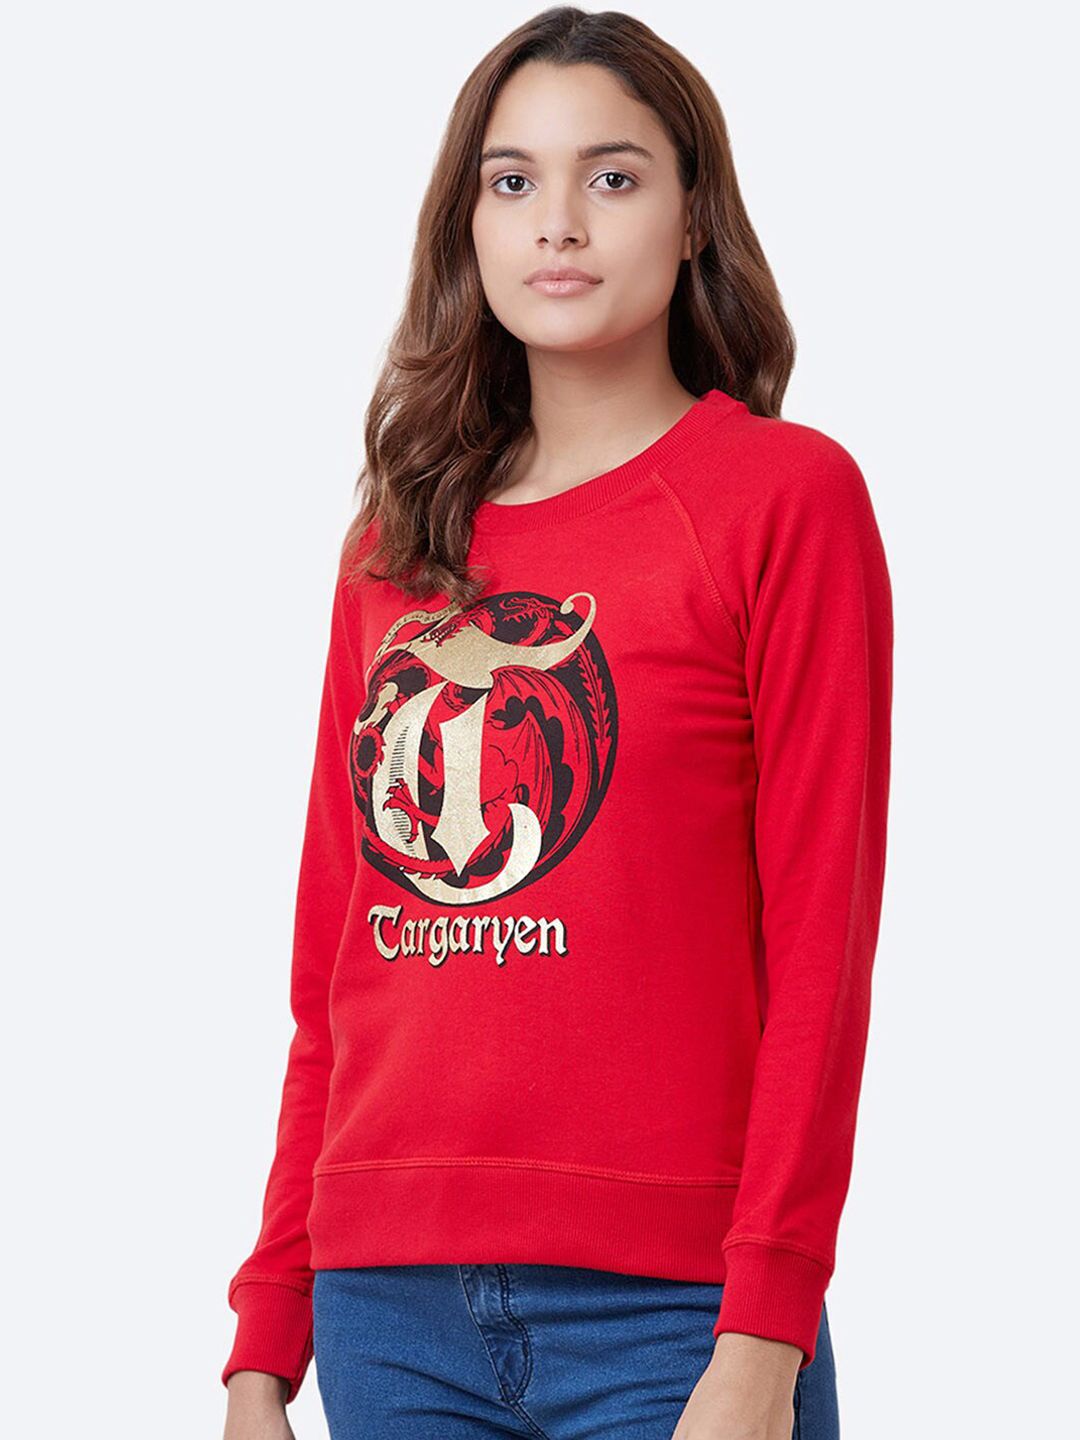 Free Authority Women Red Game Of Thrones Printed Sweatshirt Price in India